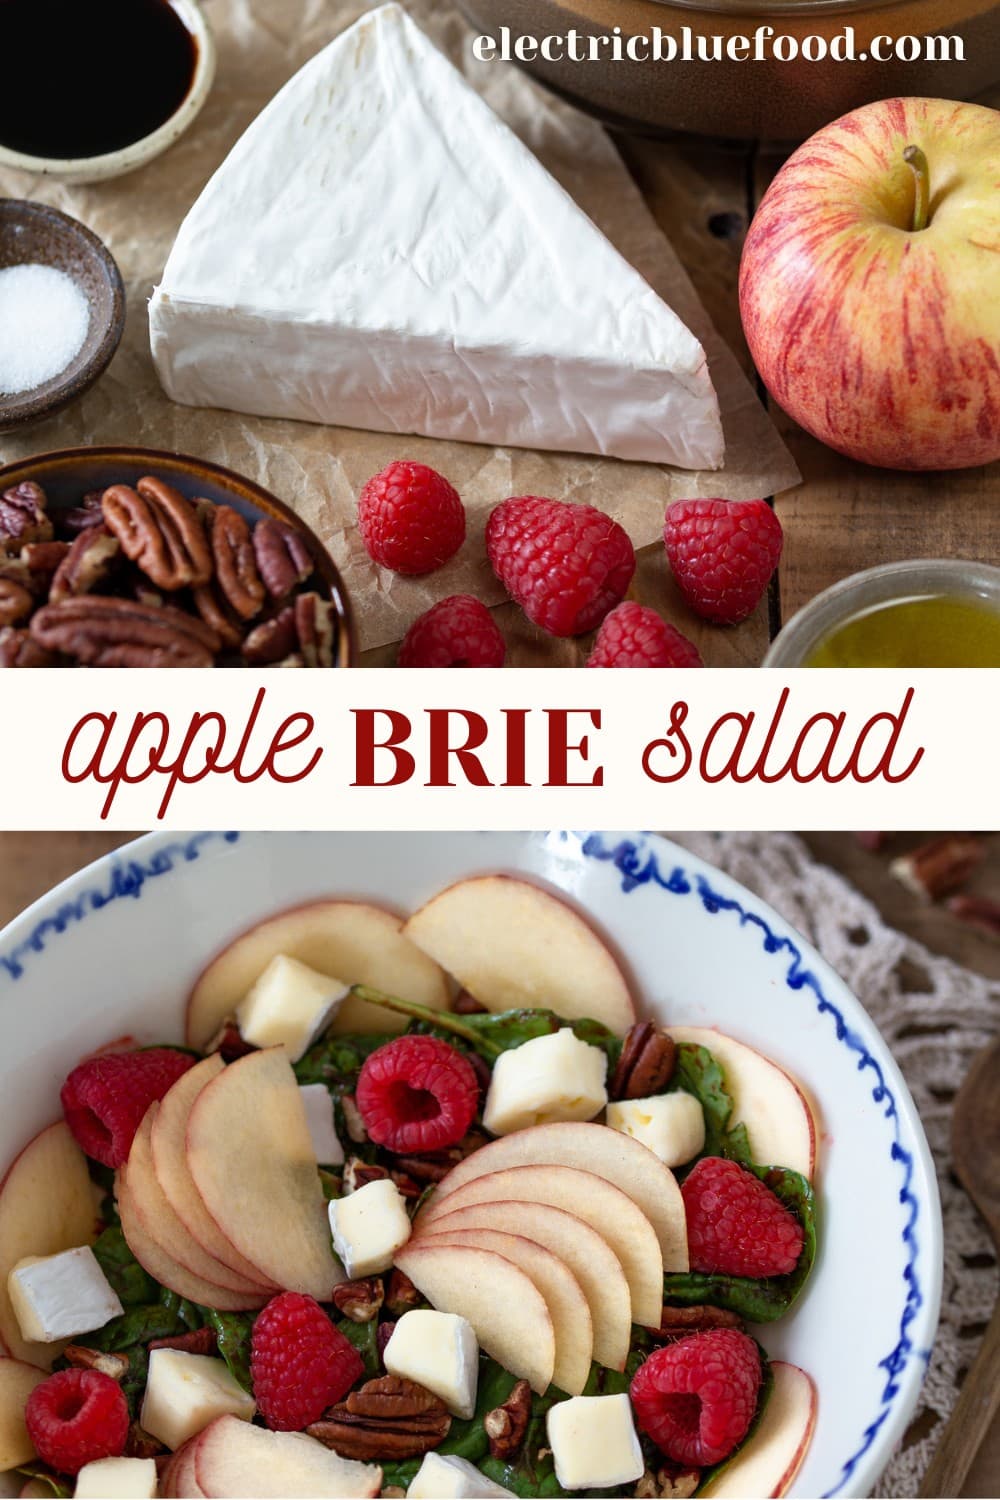 Apple brie salad with raspberries and pecans. A colourful salad with fresh fruits, nuts and a raspberry vinaigrette.